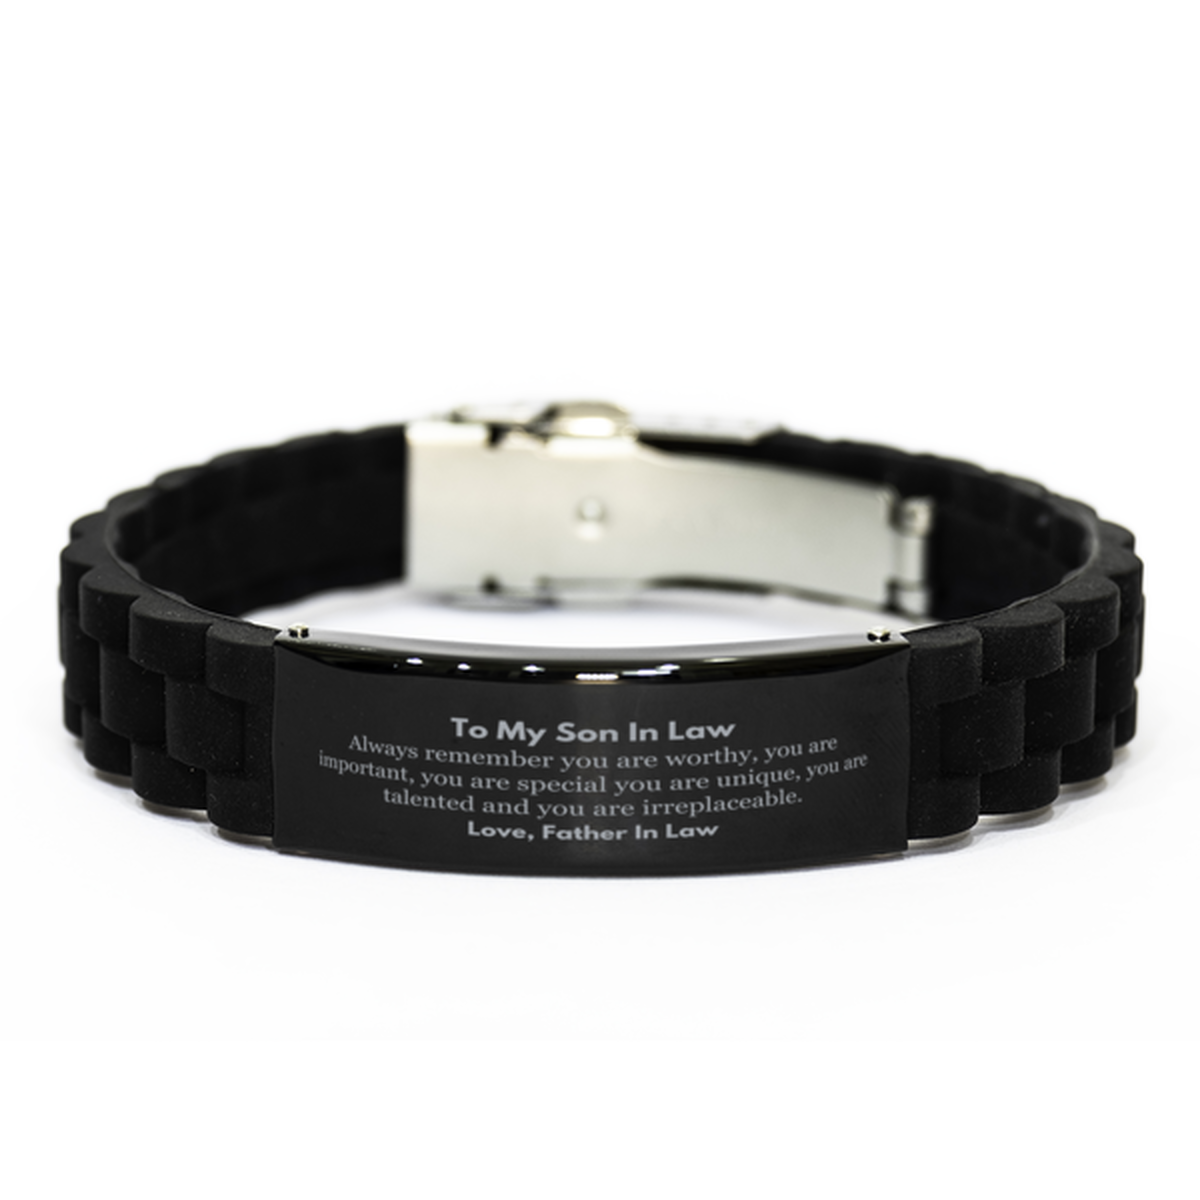 Son In Law Birthday Gifts from Father In Law, Inspirational Black Glidelock Clasp Bracelet for Son In Law Christmas Graduation Gifts for Son In Law Always remember you are worthy, you are important. Love, Father In Law